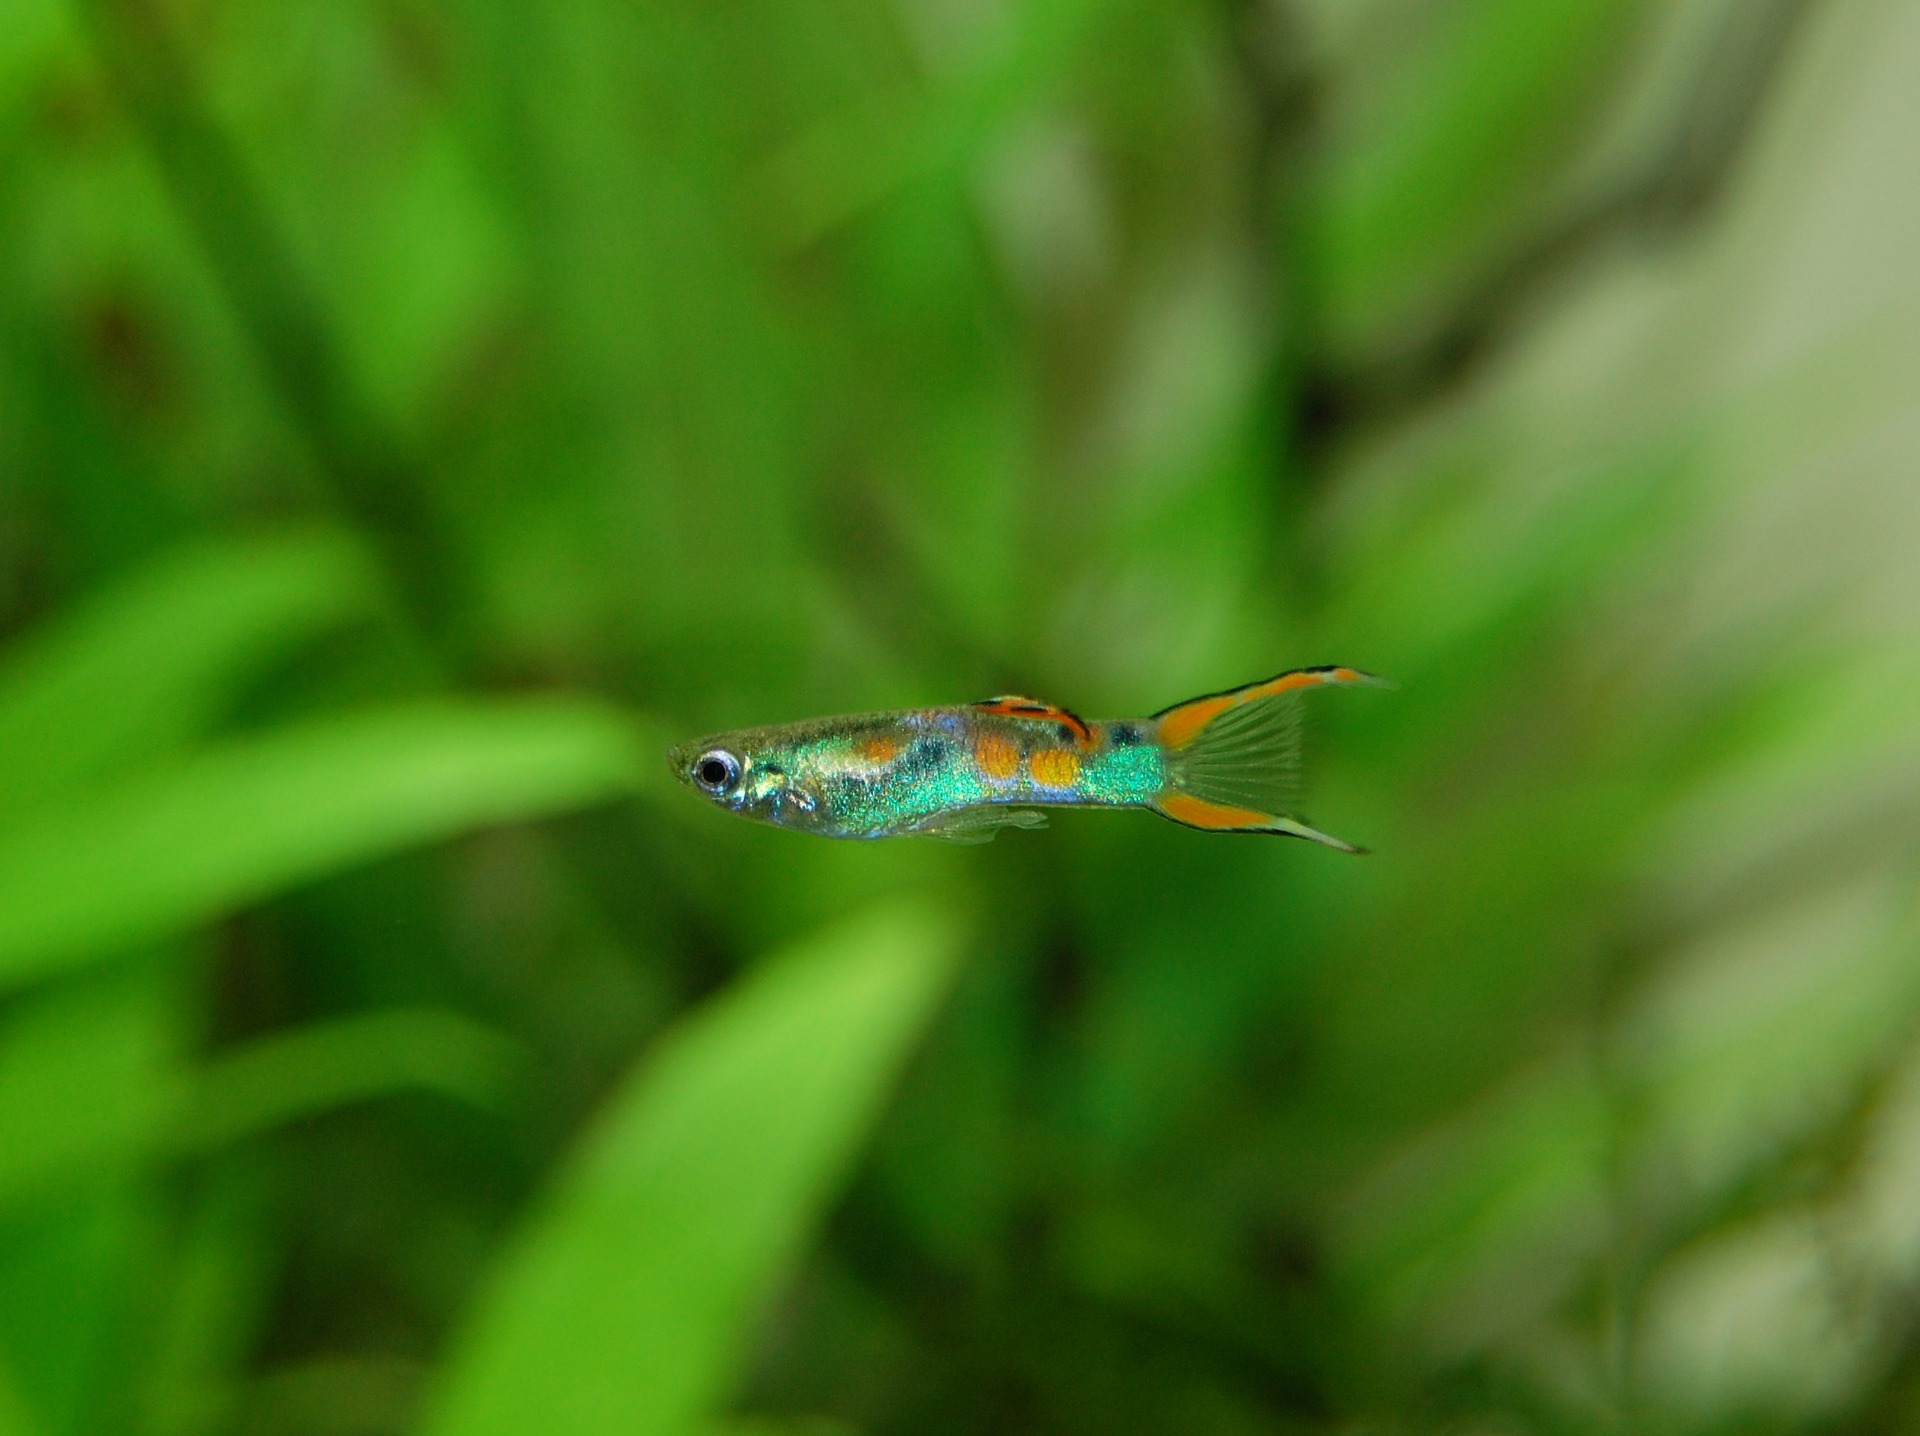 How Many Babies Do Guppies Have?